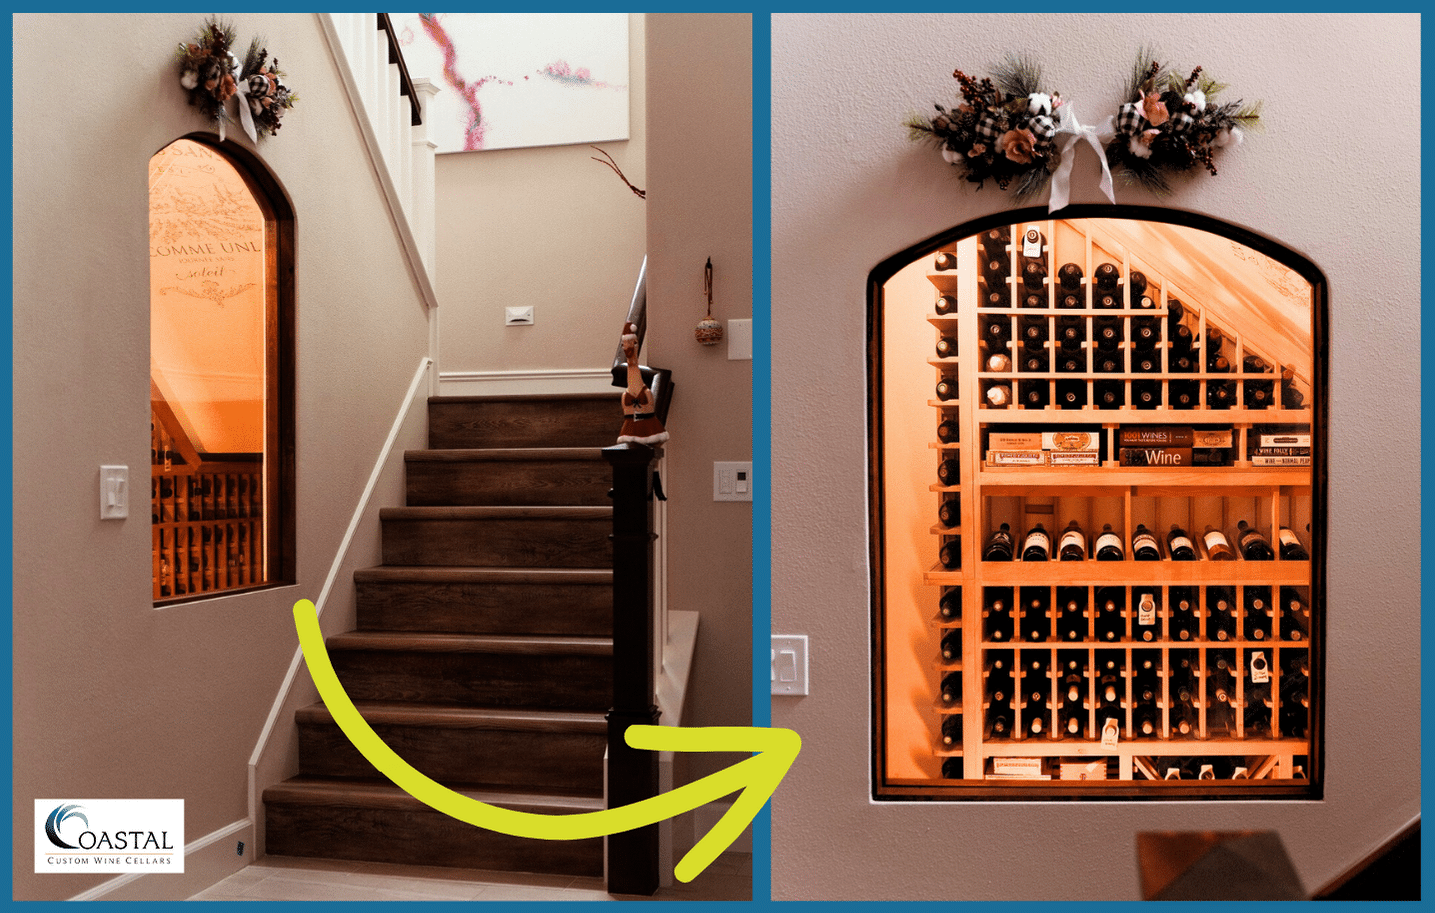 The Extra Space Under the Stairs was Utilized For a Custom Home Wine Cellar